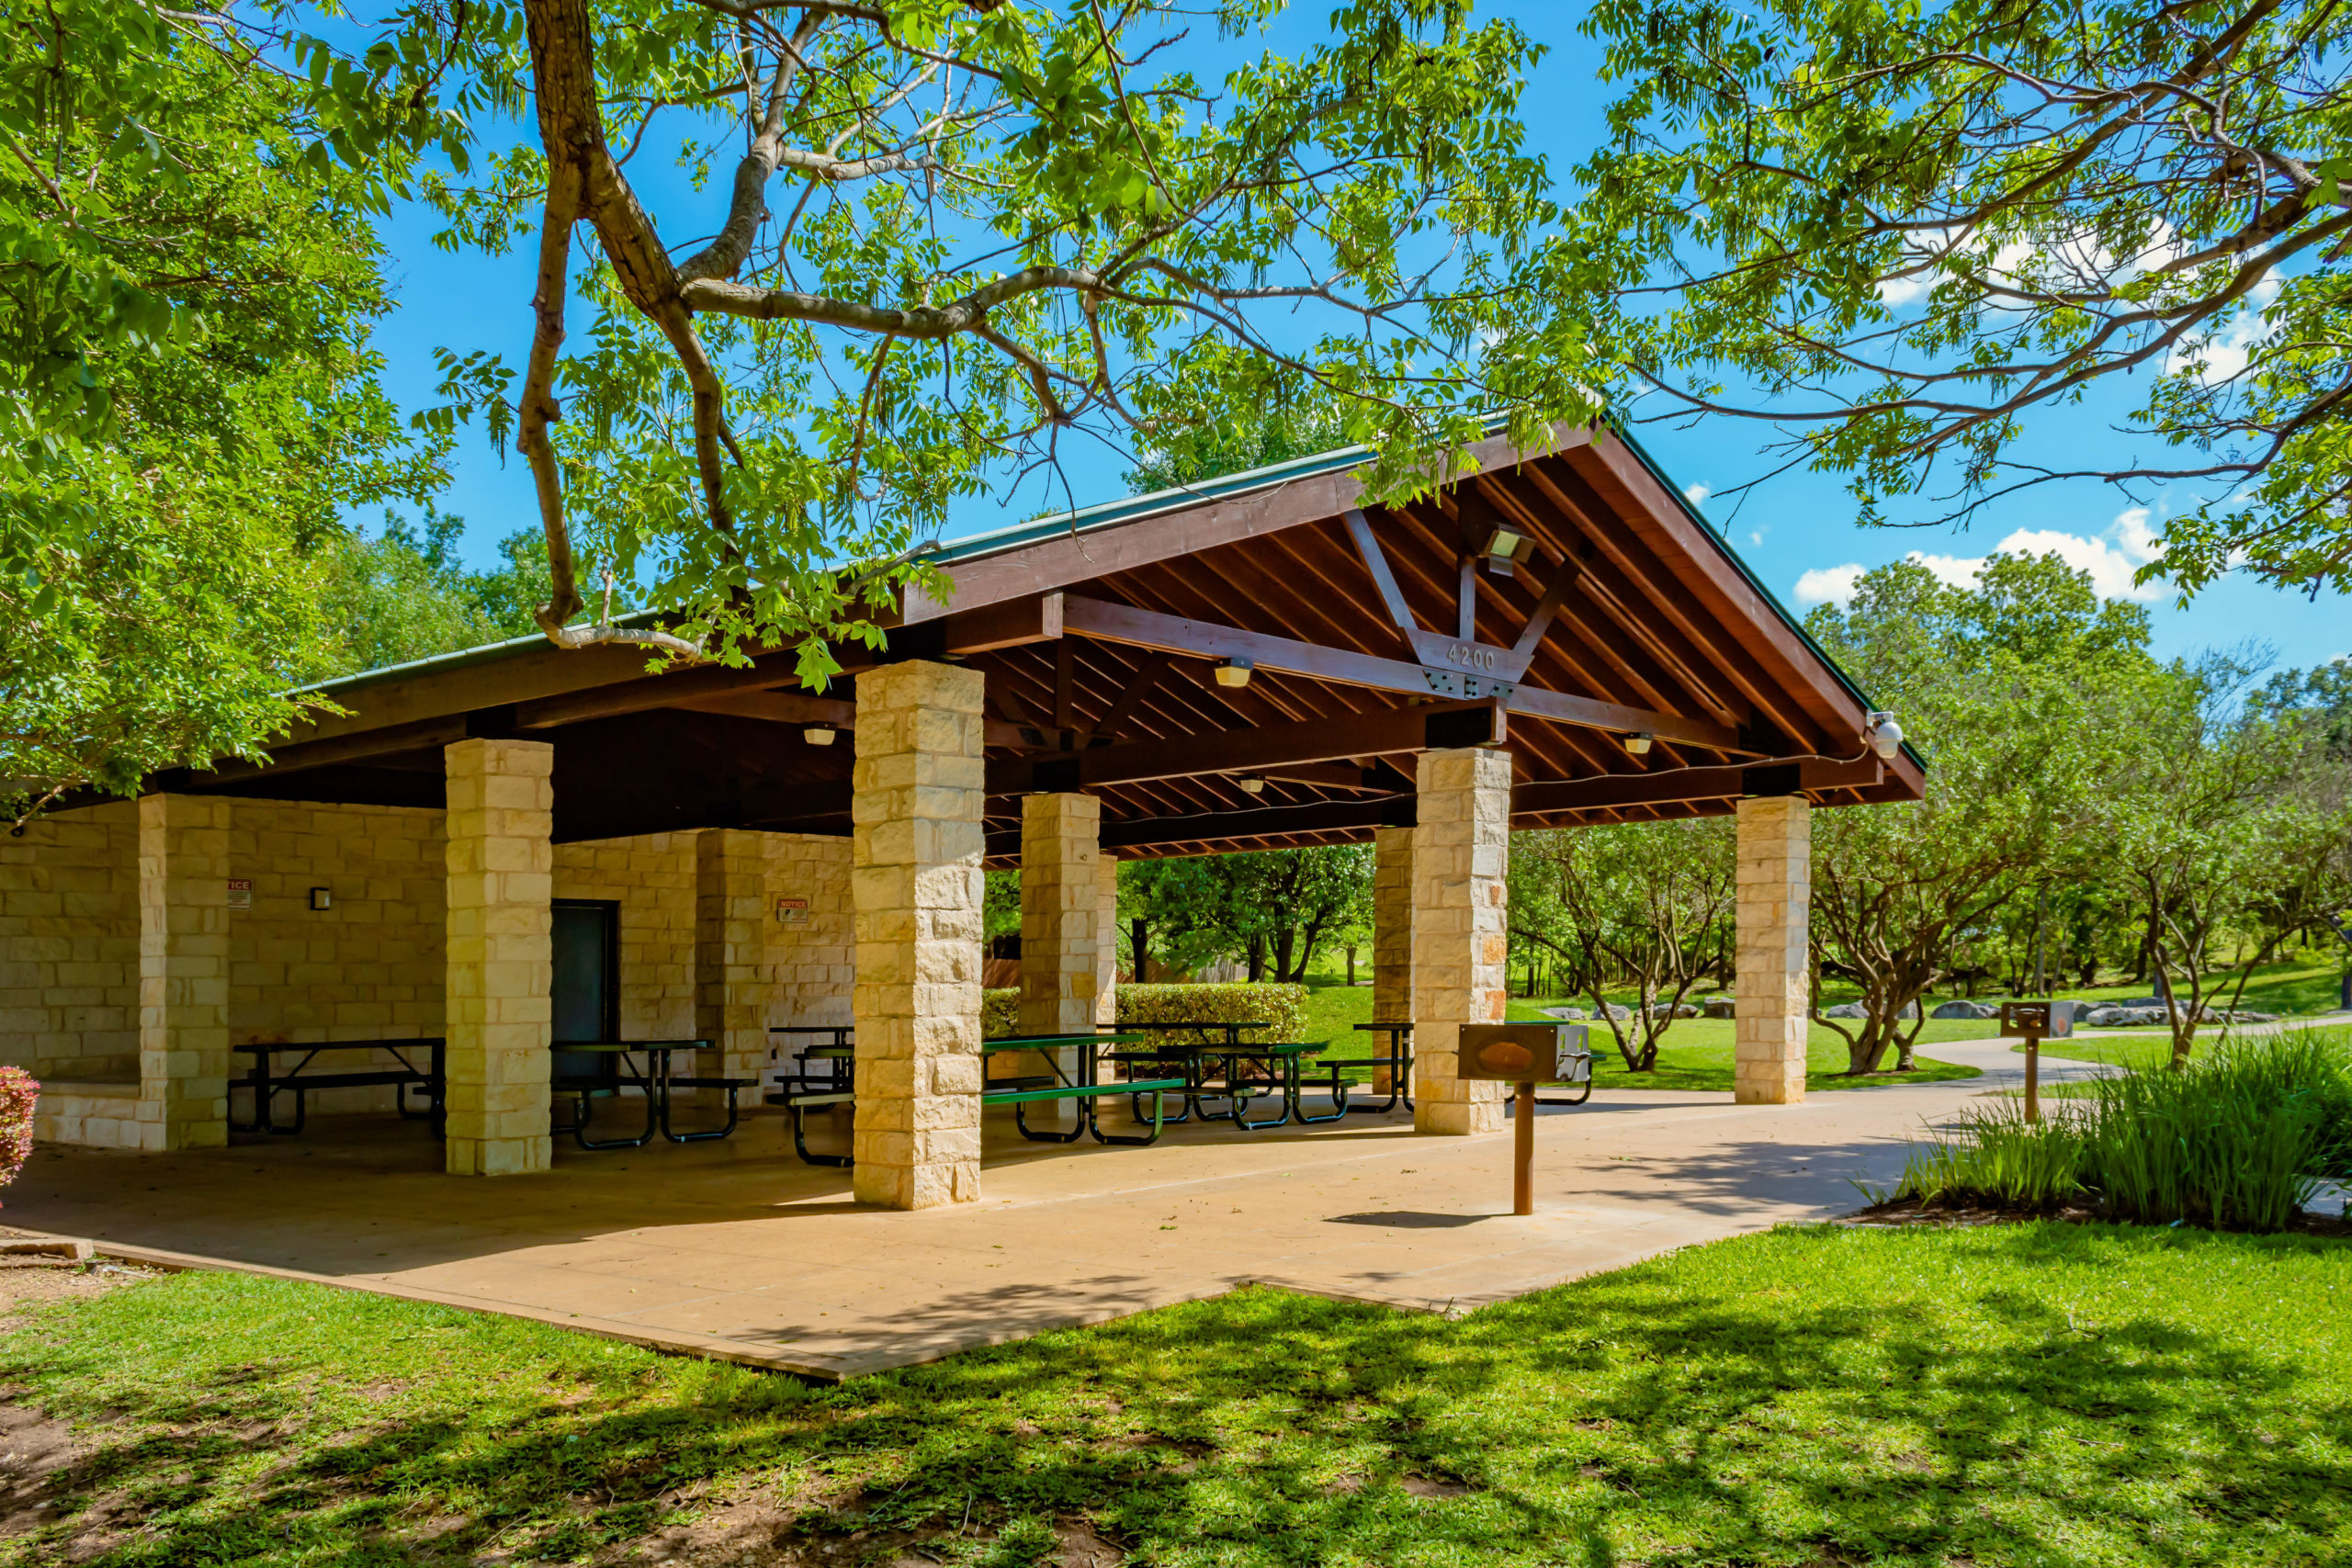 Picture of the covered pavilion and tables.